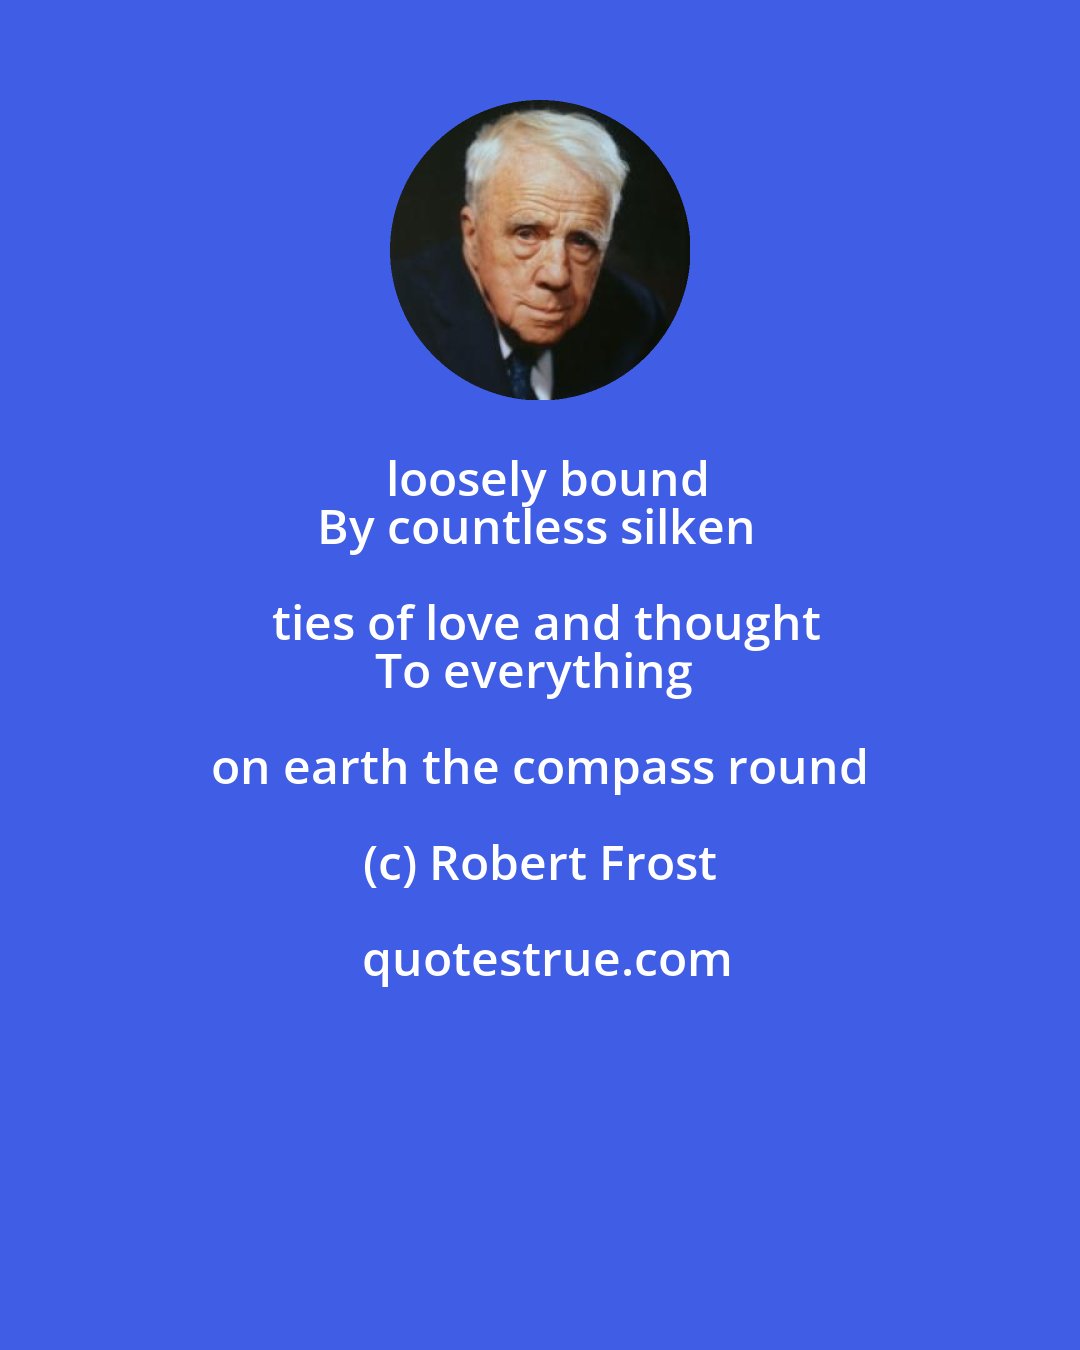 Robert Frost: loosely bound
By countless silken ties of love and thought
To everything on earth the compass round